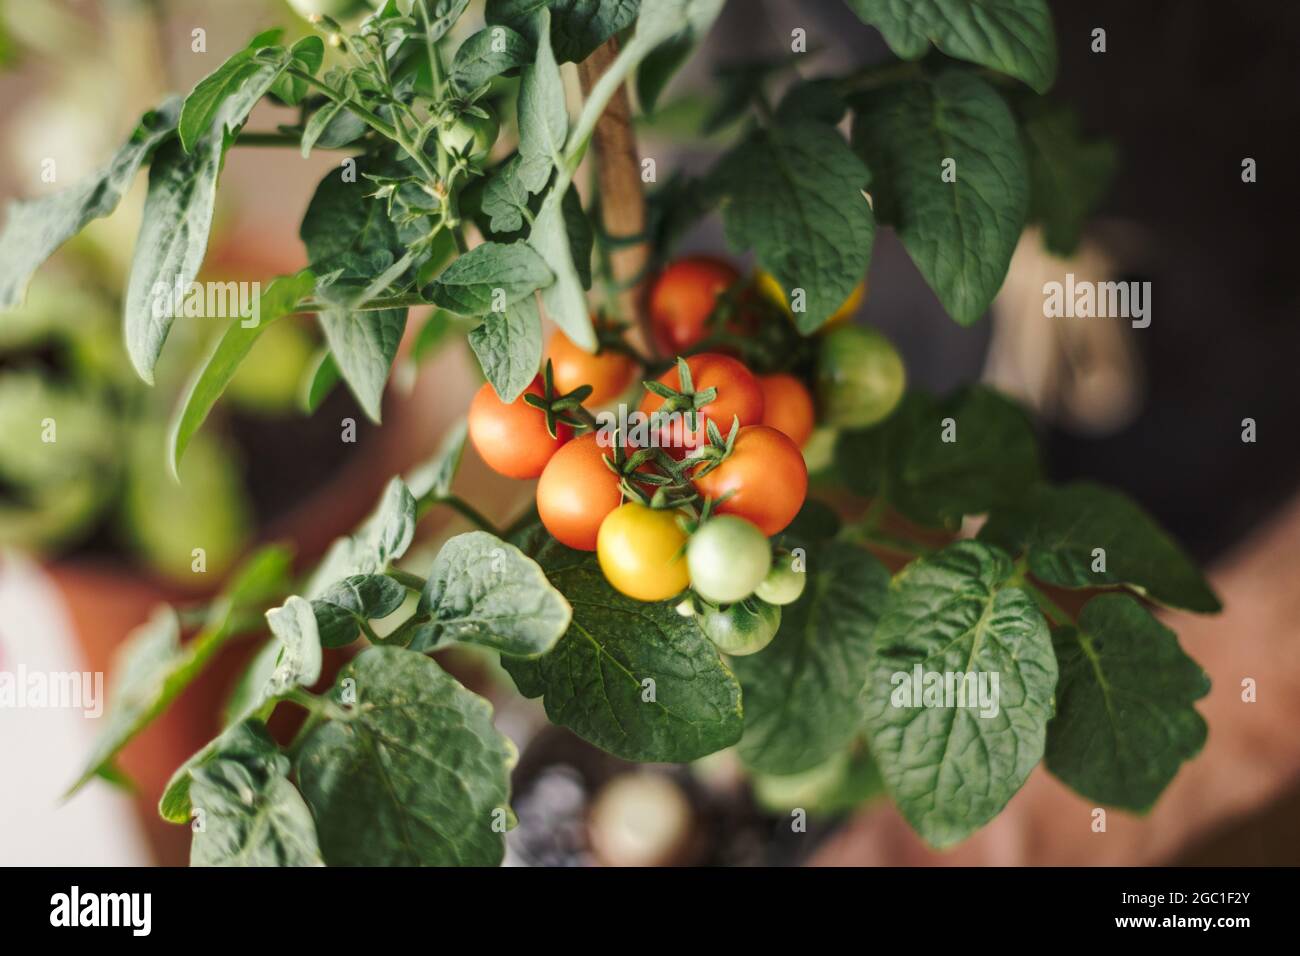 Close up view of a home farming cherry tomato plant with small red tomatoes. Home organic cultivation and eco fresh vegetables concept Stock Photo